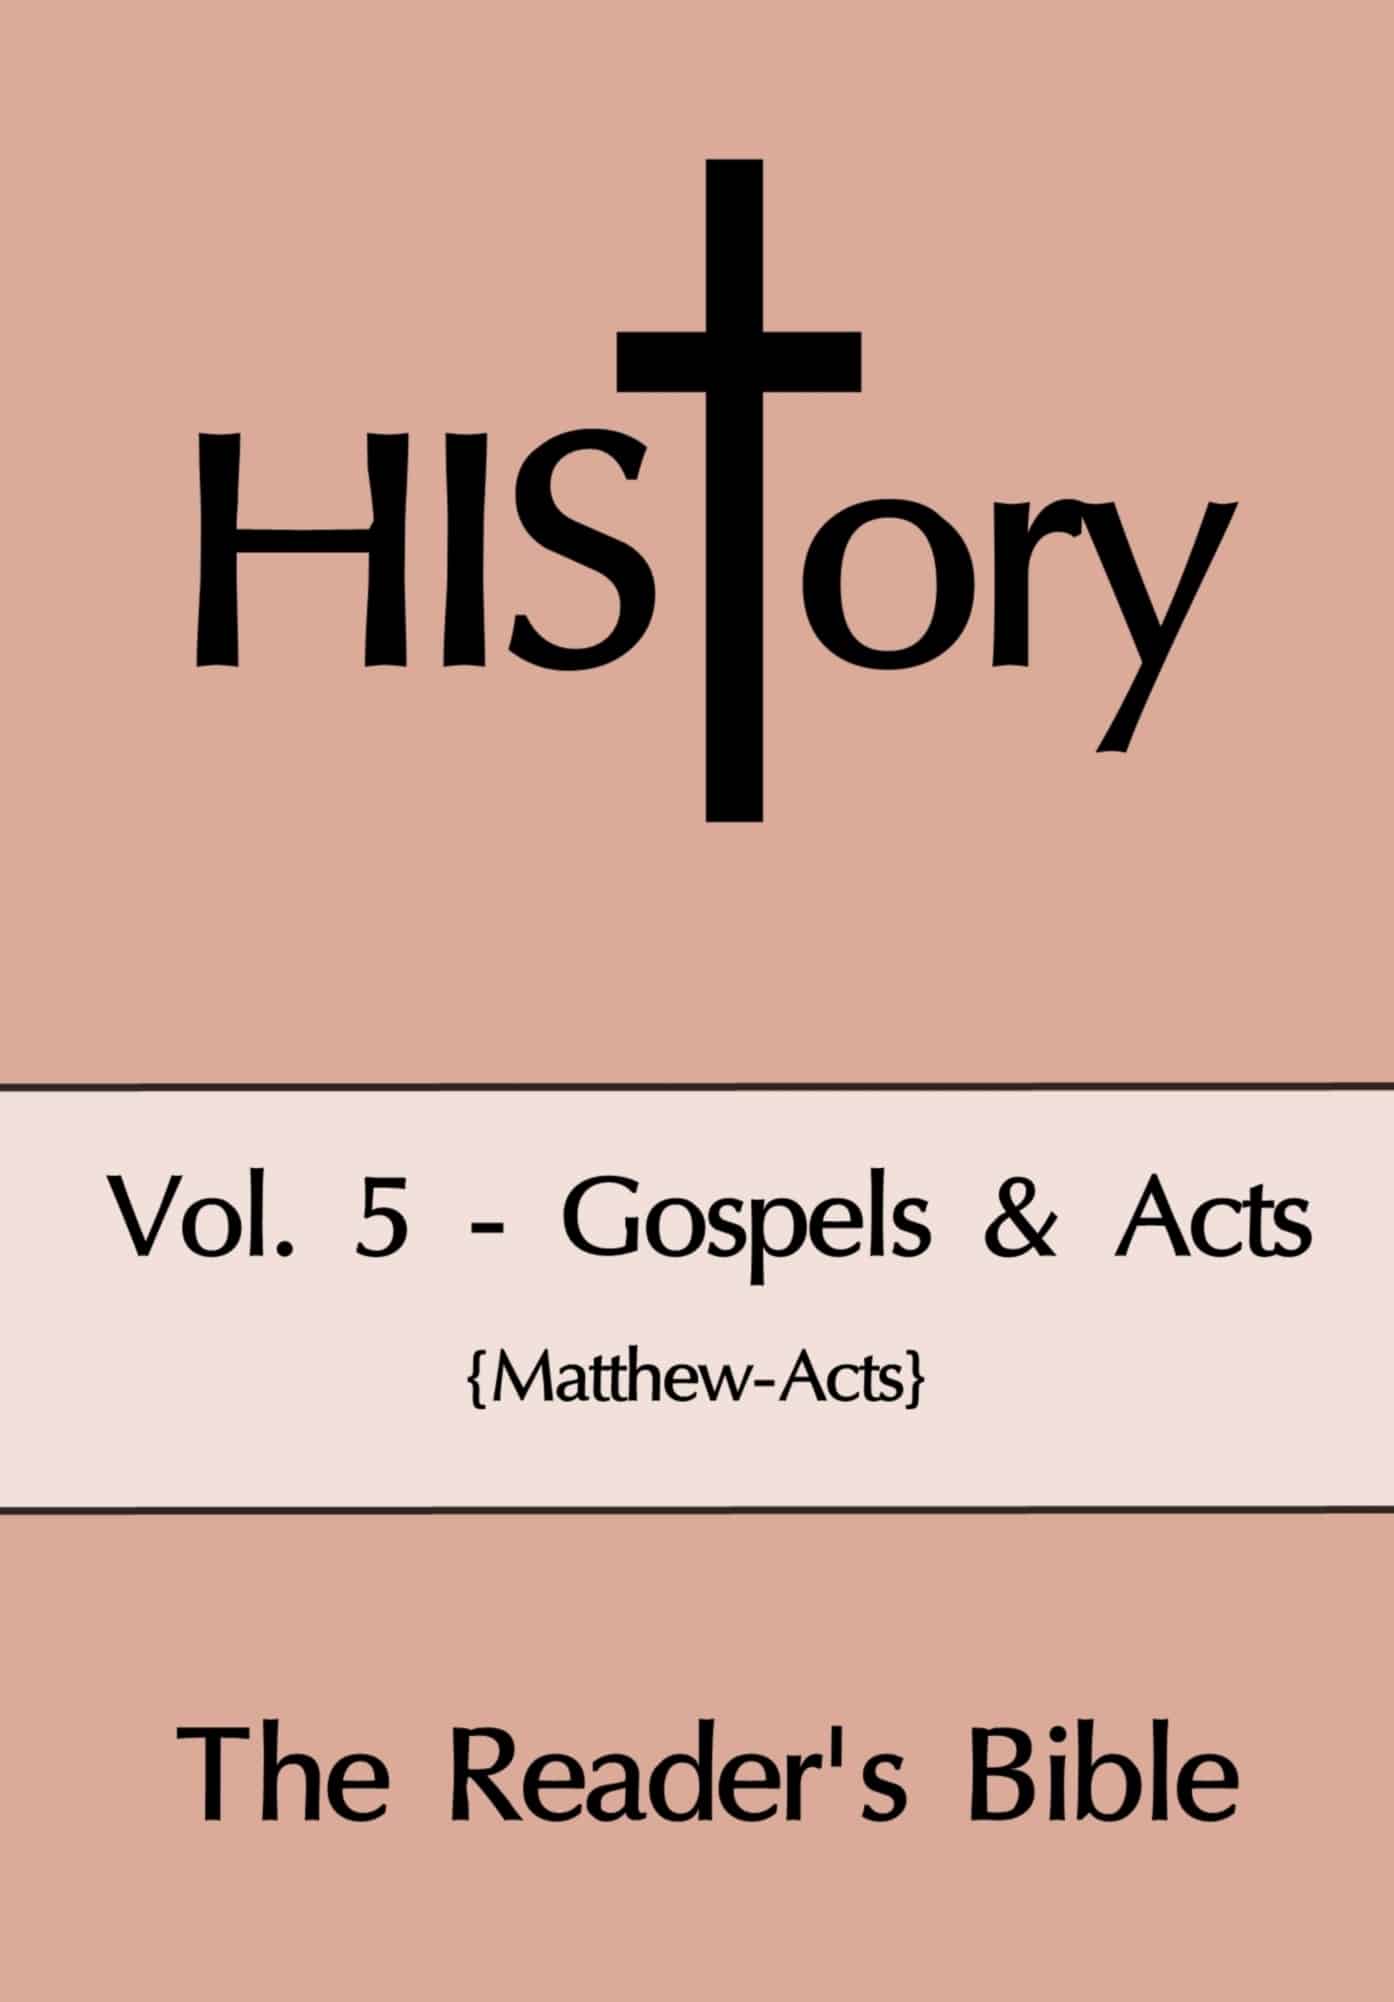 HIStory: The Reader’s Bible Vol. 5 – Gospels & Acts {Now Available!}